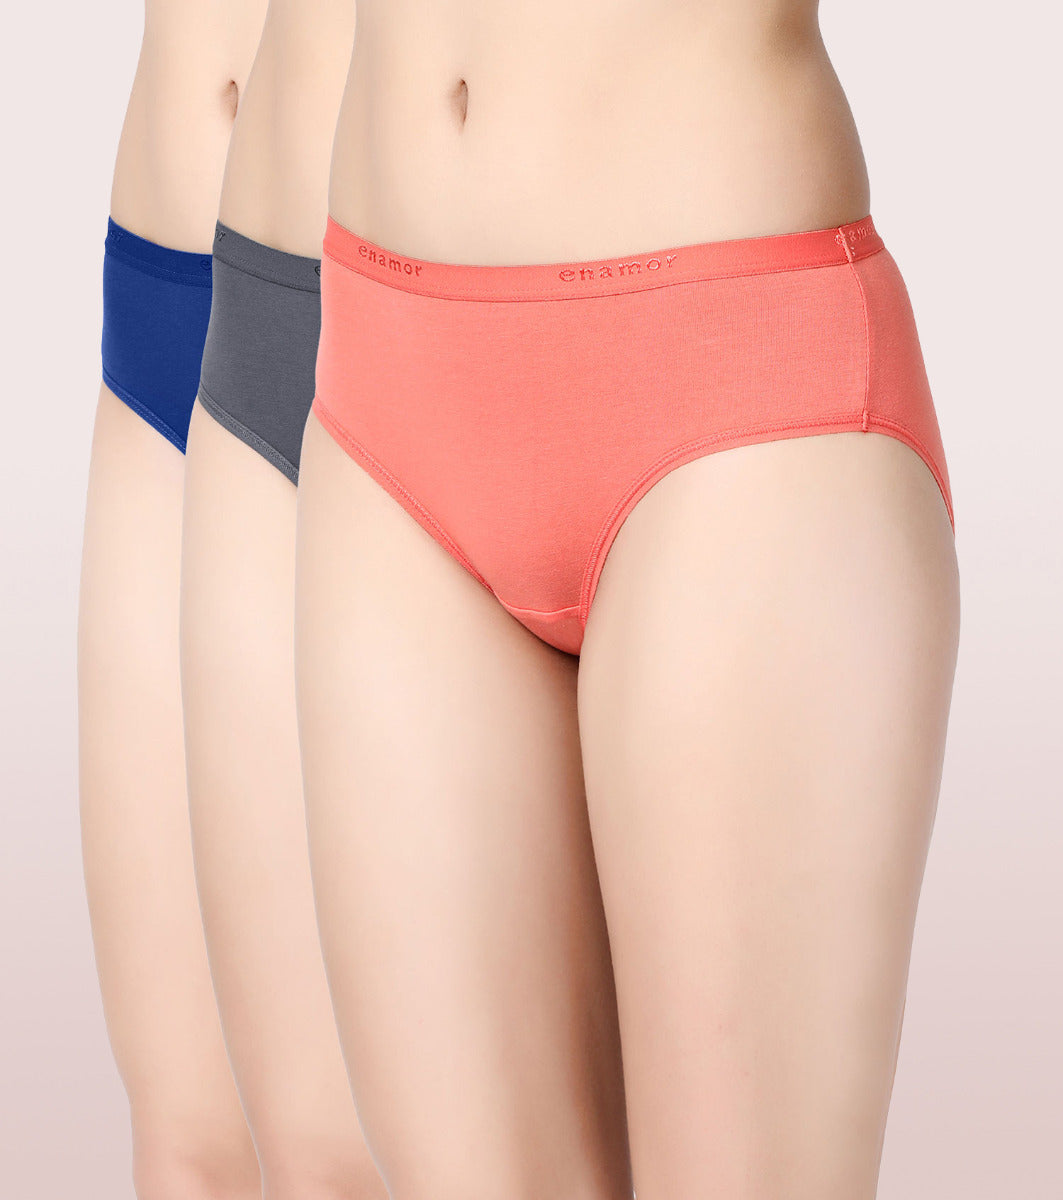 Low Waist Bikini Cotton Panty - Pack Of 3- Colors And Print May